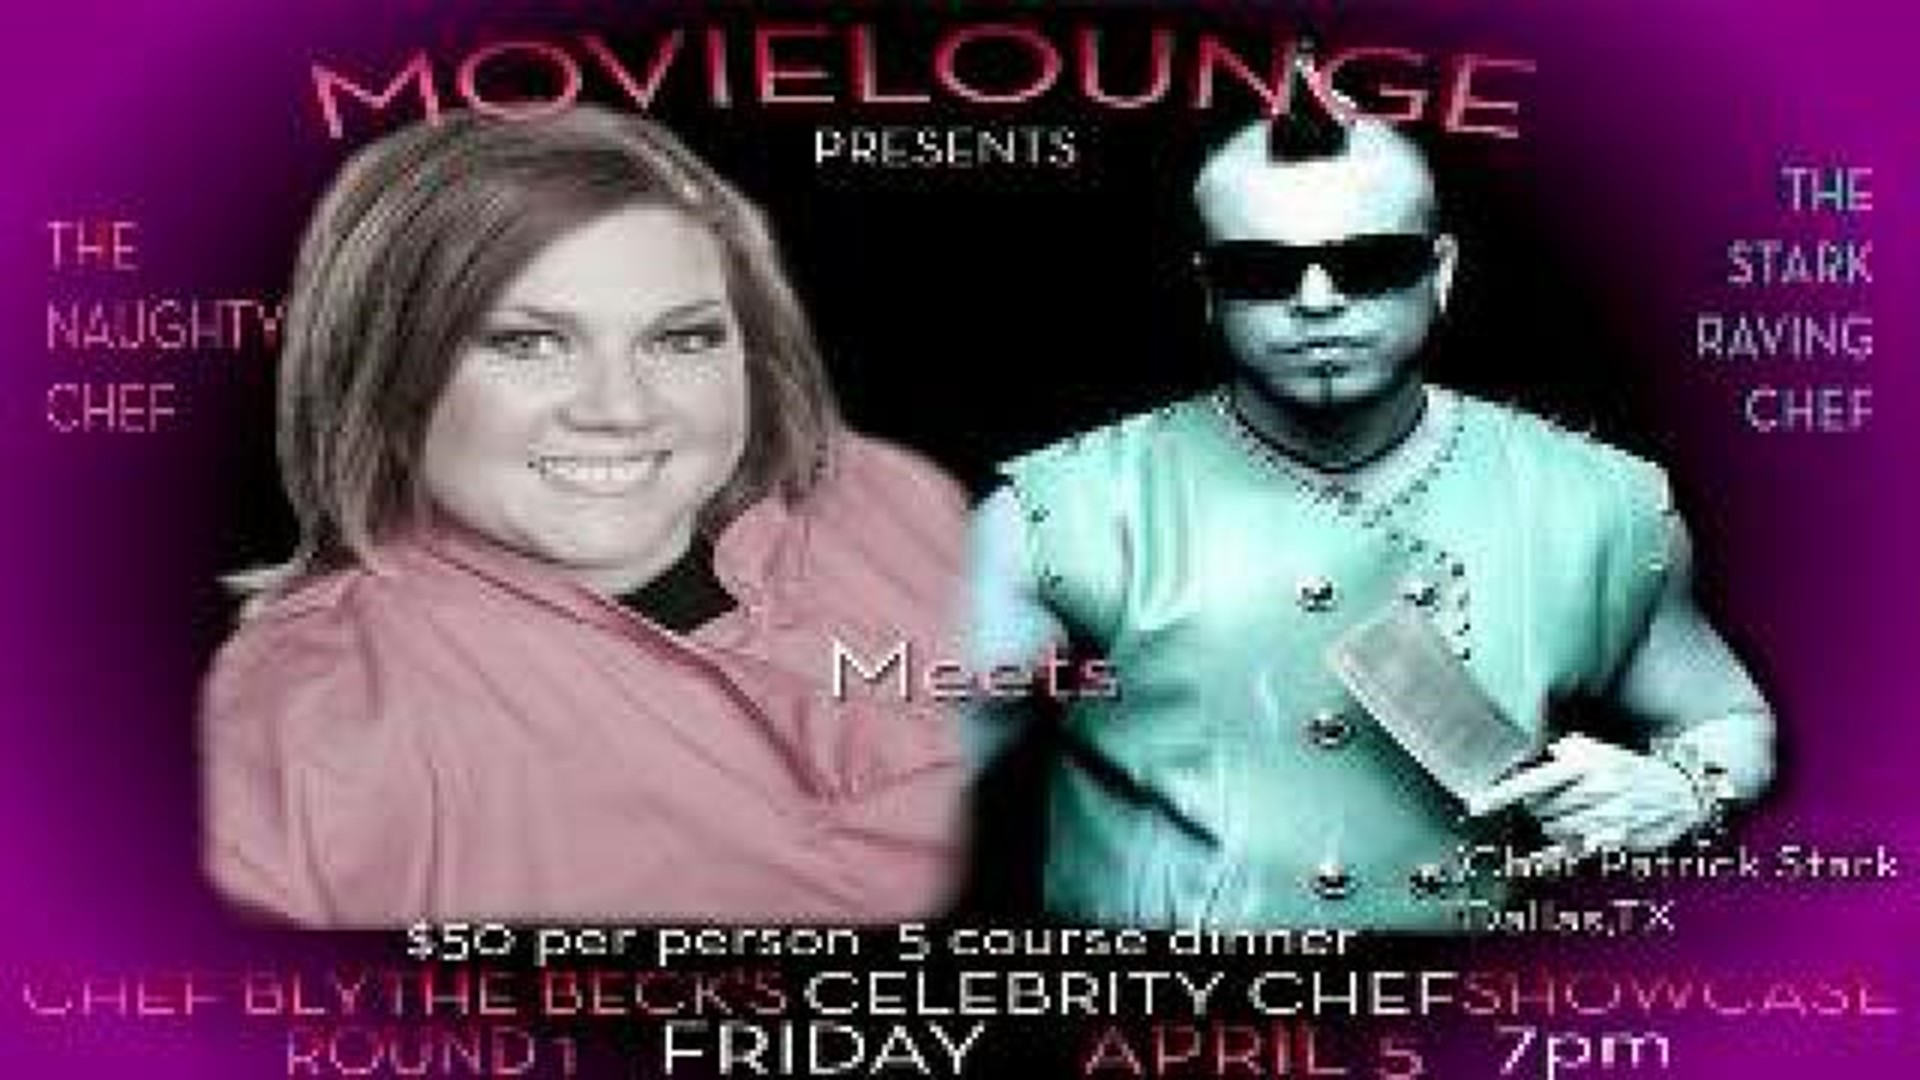 Celebrity Chefs, Farmers Market Among Spring Events at MovieLounge